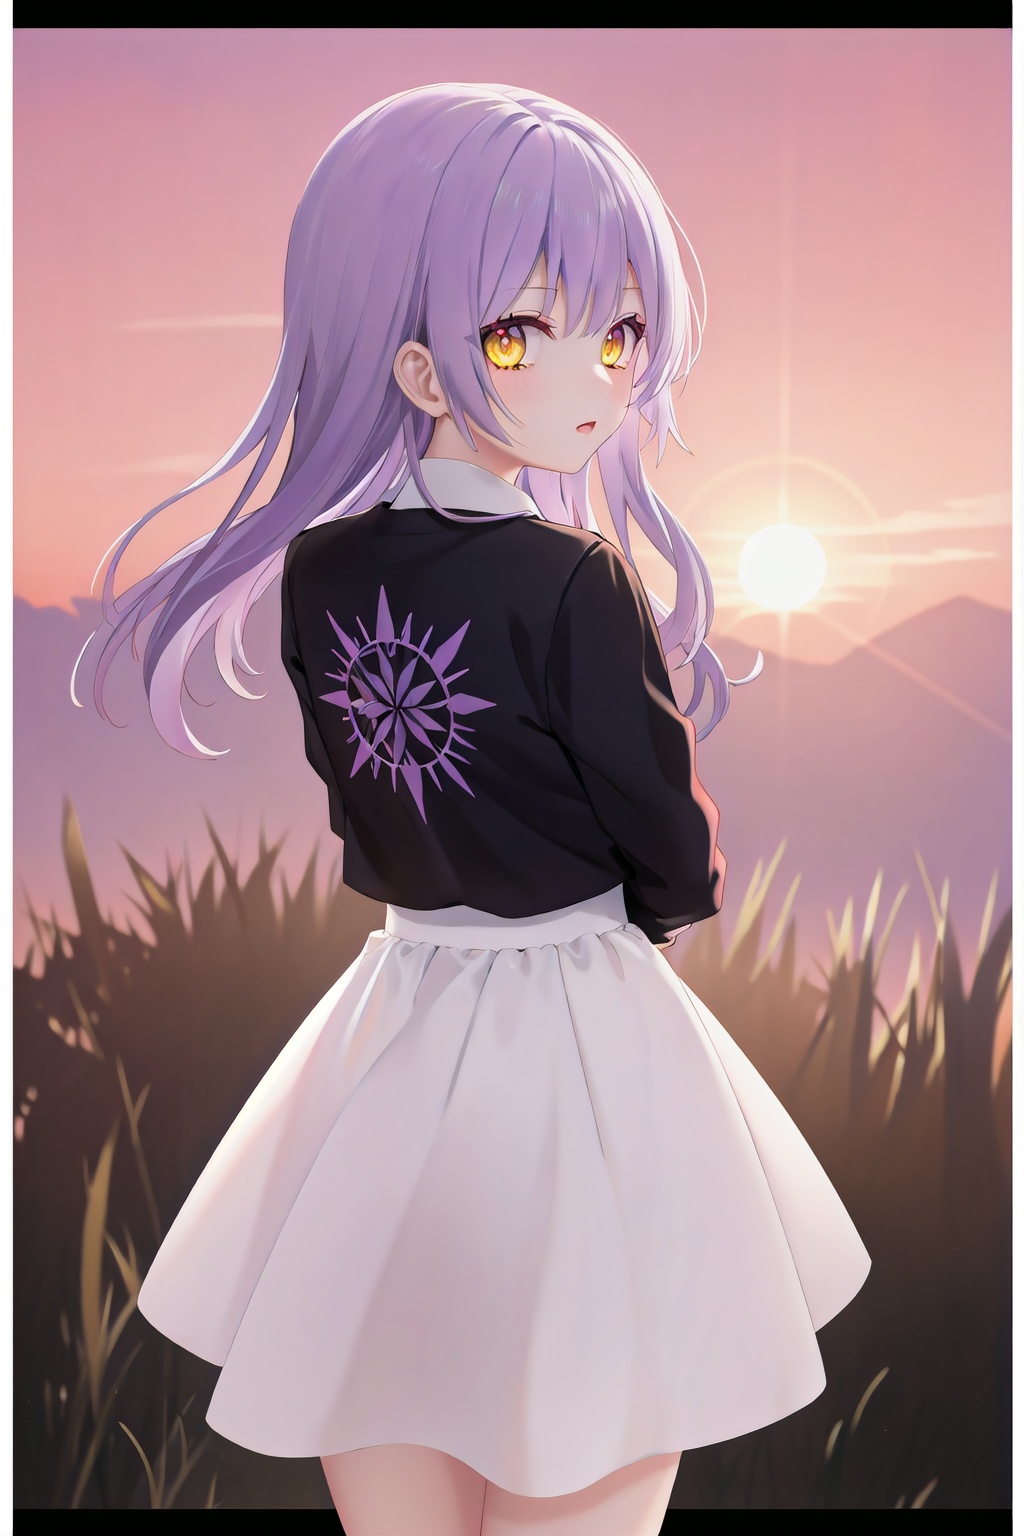 from above, from behind, cowboy shot, turn to look at viewer, (1girl:1.2), (purple hair:1.2), long hair, yellow eyes, black jacket, white dress, arms behind, (backlighting:1.2), glowing eyes, Dawn and dusk, sunset, twilight, (gradient sky:1.3), (dark sky:1.14), red sky, orange sky, pink background, outdoors, sun above horizon, (white border:1.5), (purple flower:0.7)